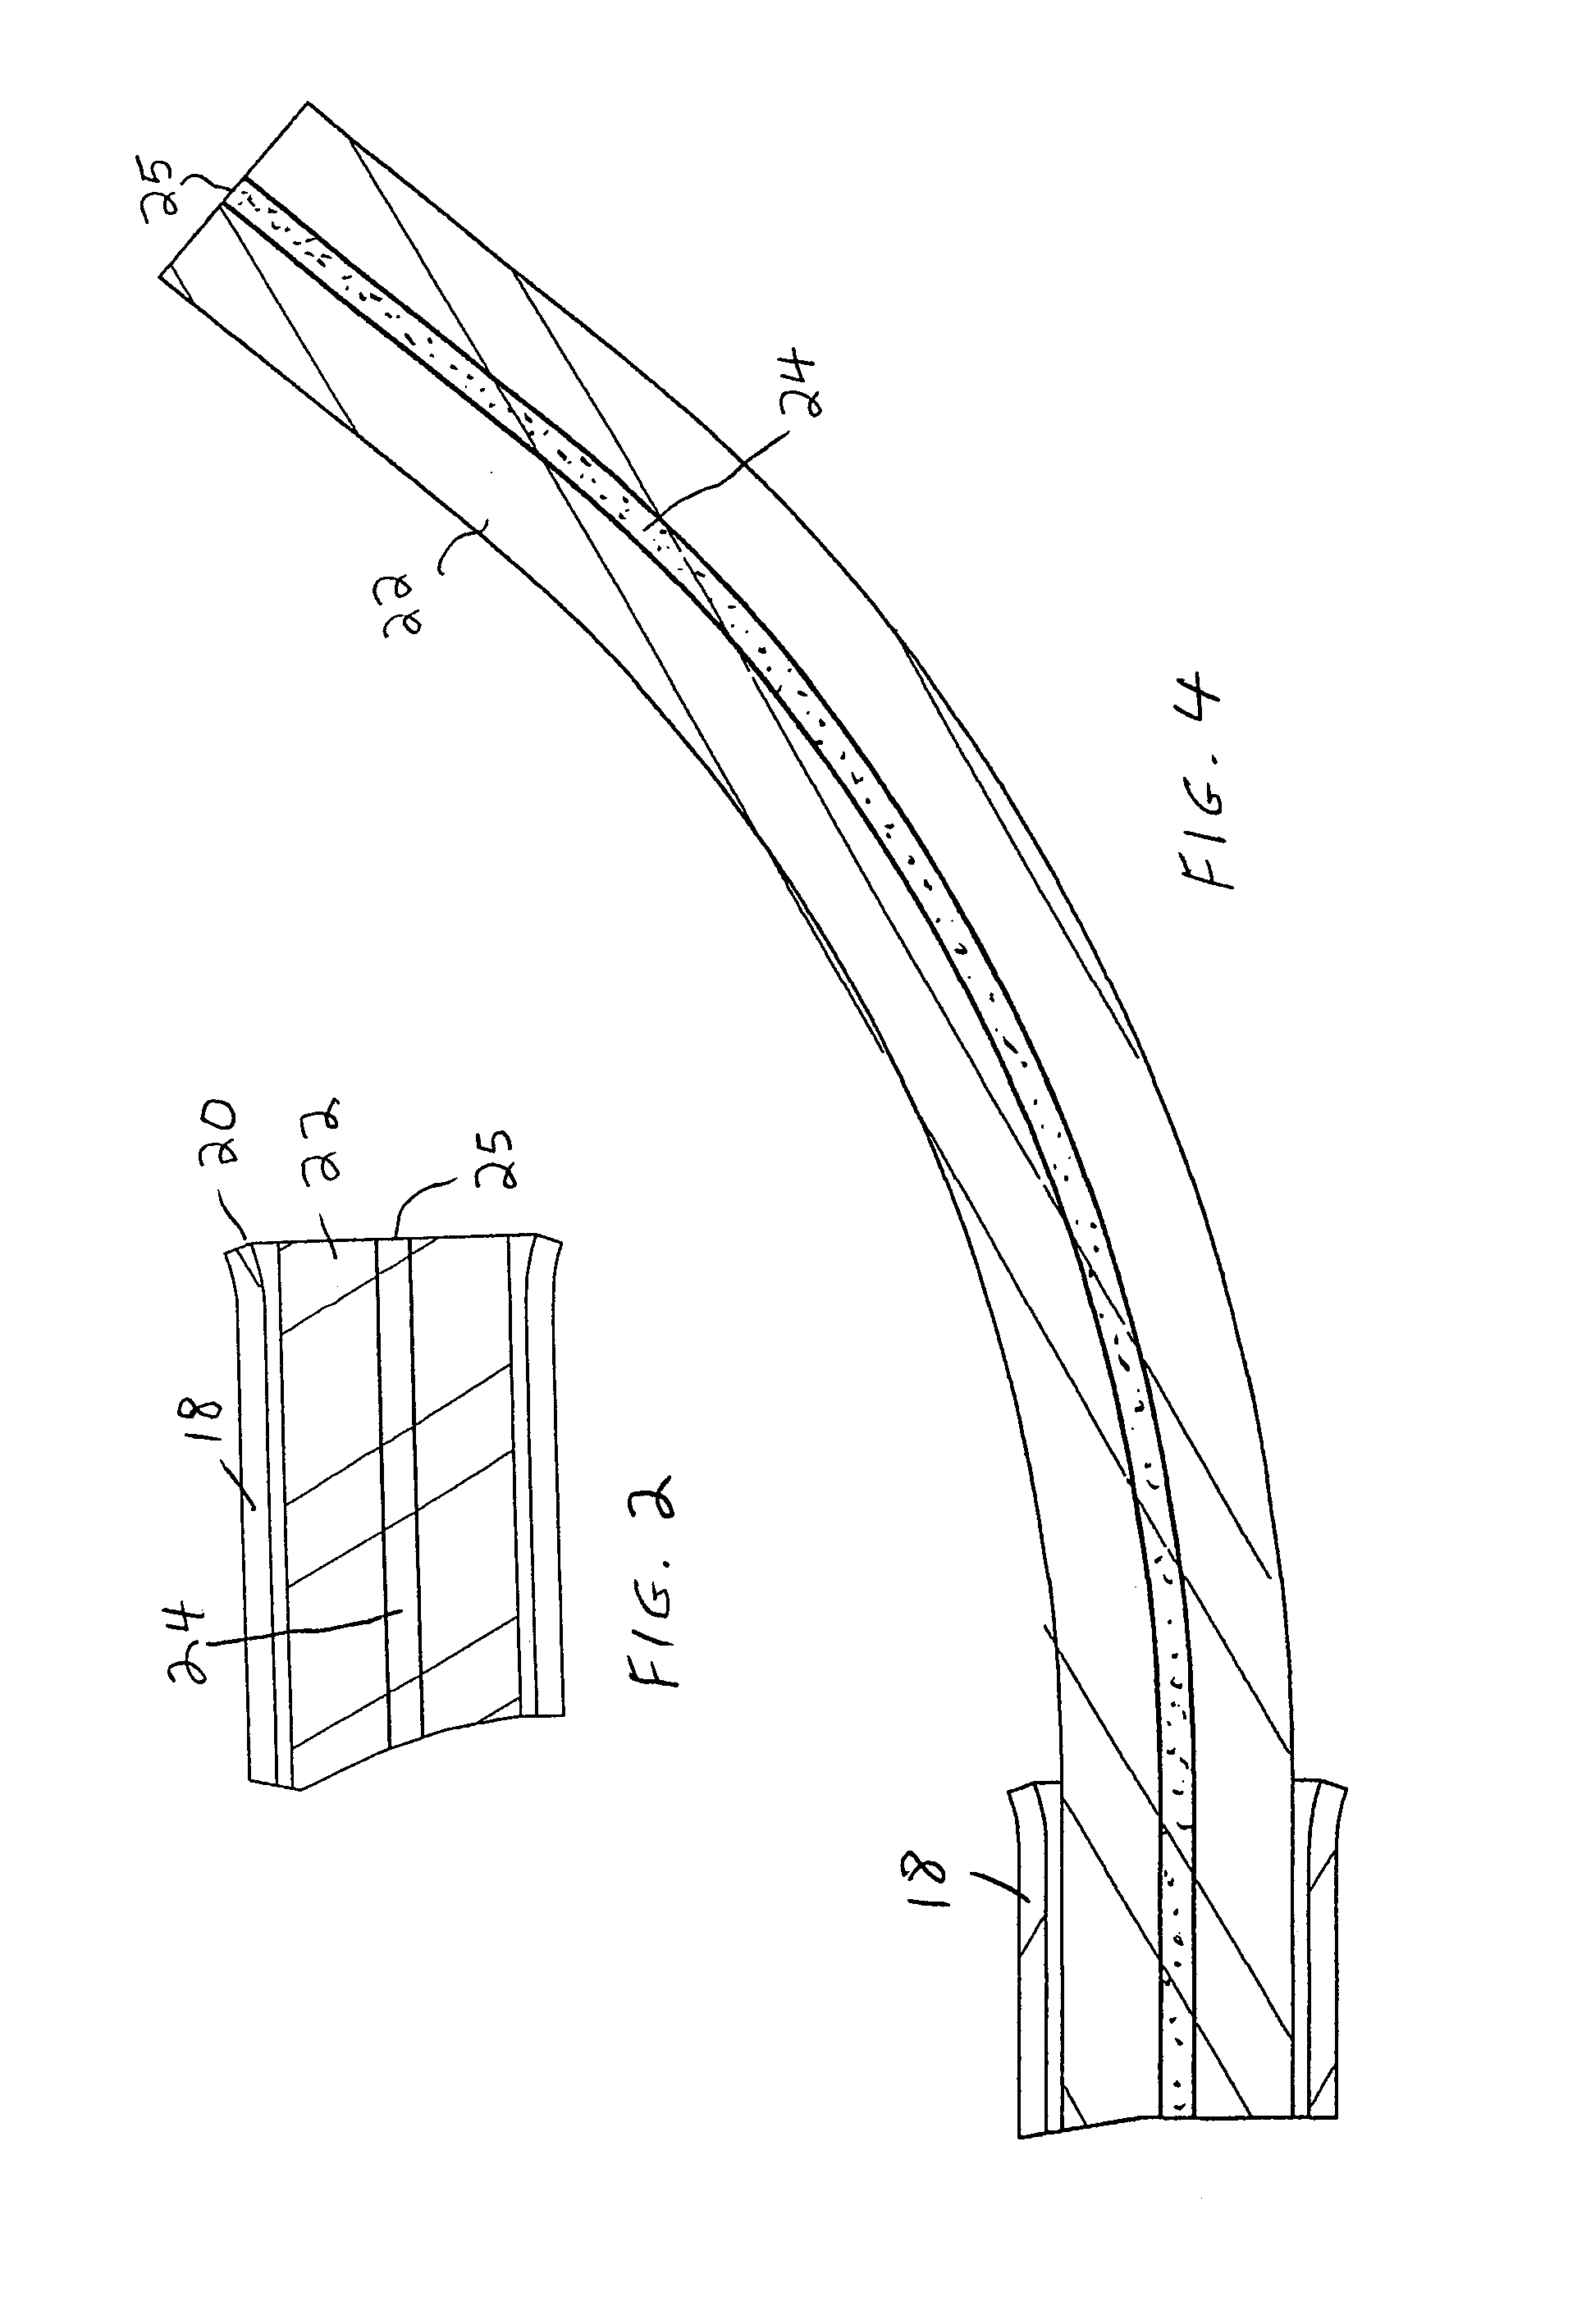 Position-controllable laser surgical instrument